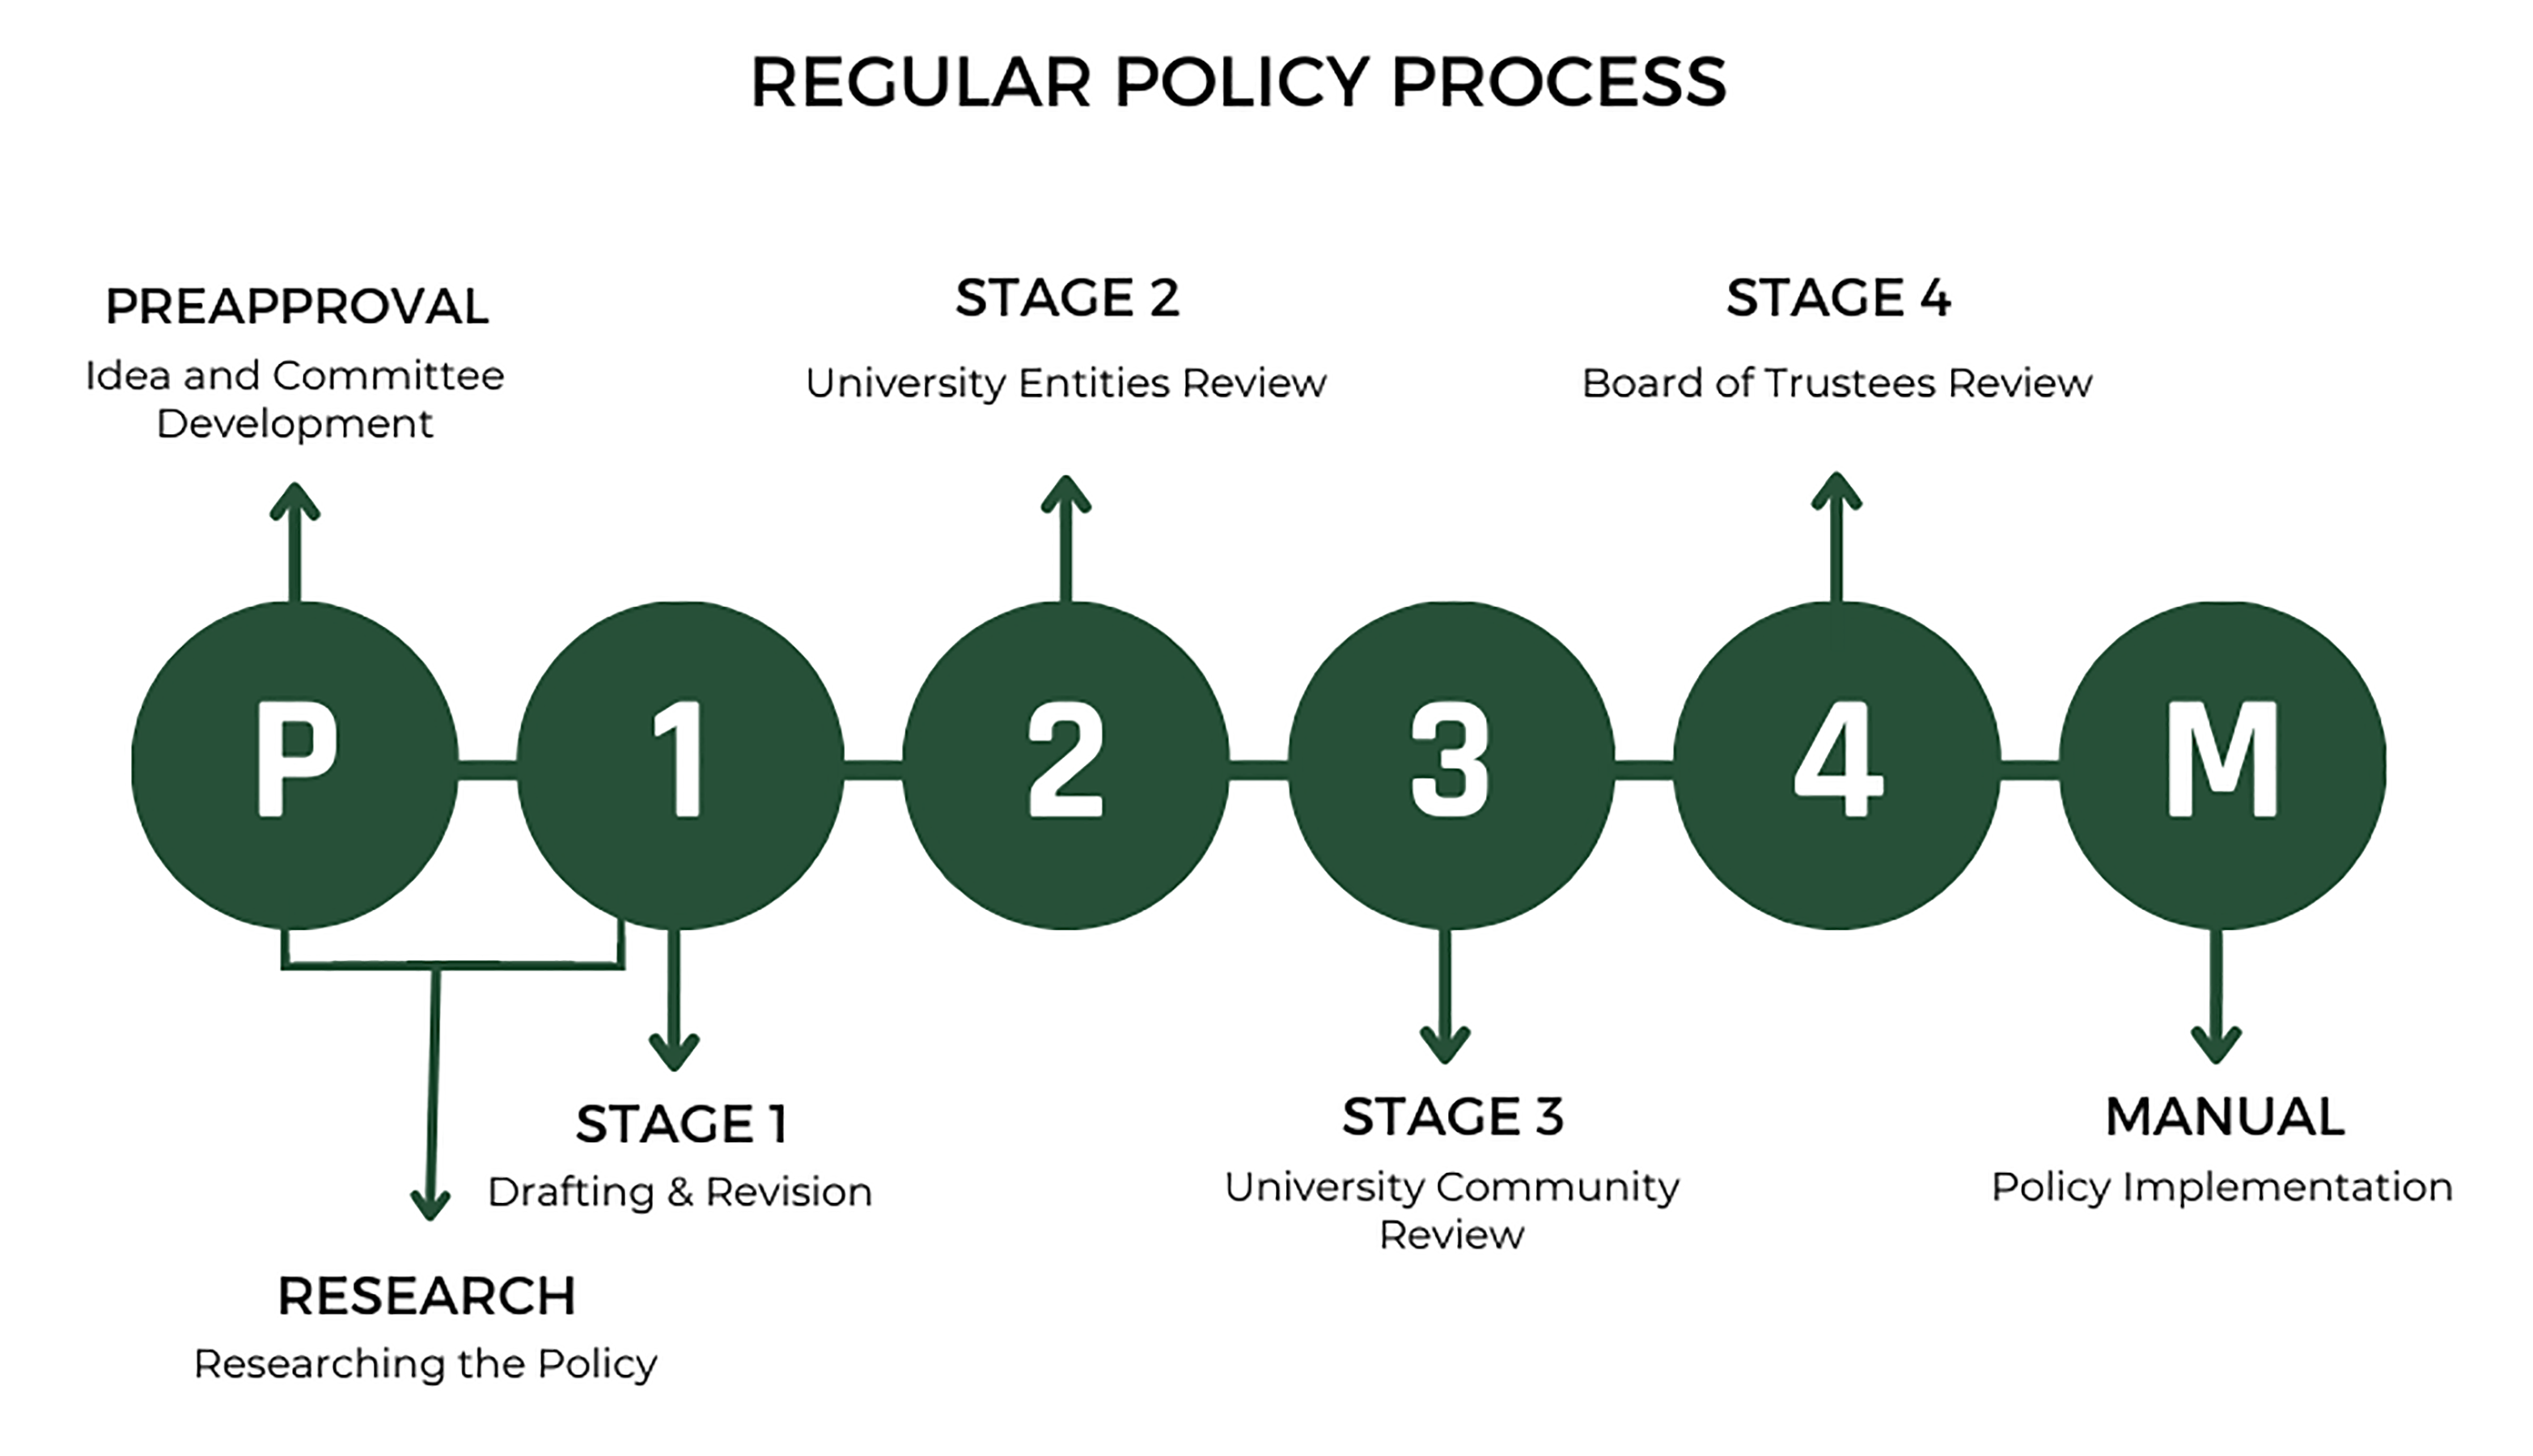 This graphic overviews the steps in the regular policy process: preapproval, stage 1: drafting and revision, stage 2: shared governance entities review, stage 3: university community review, stage 4: board of trustees approval, and policy manual implementation